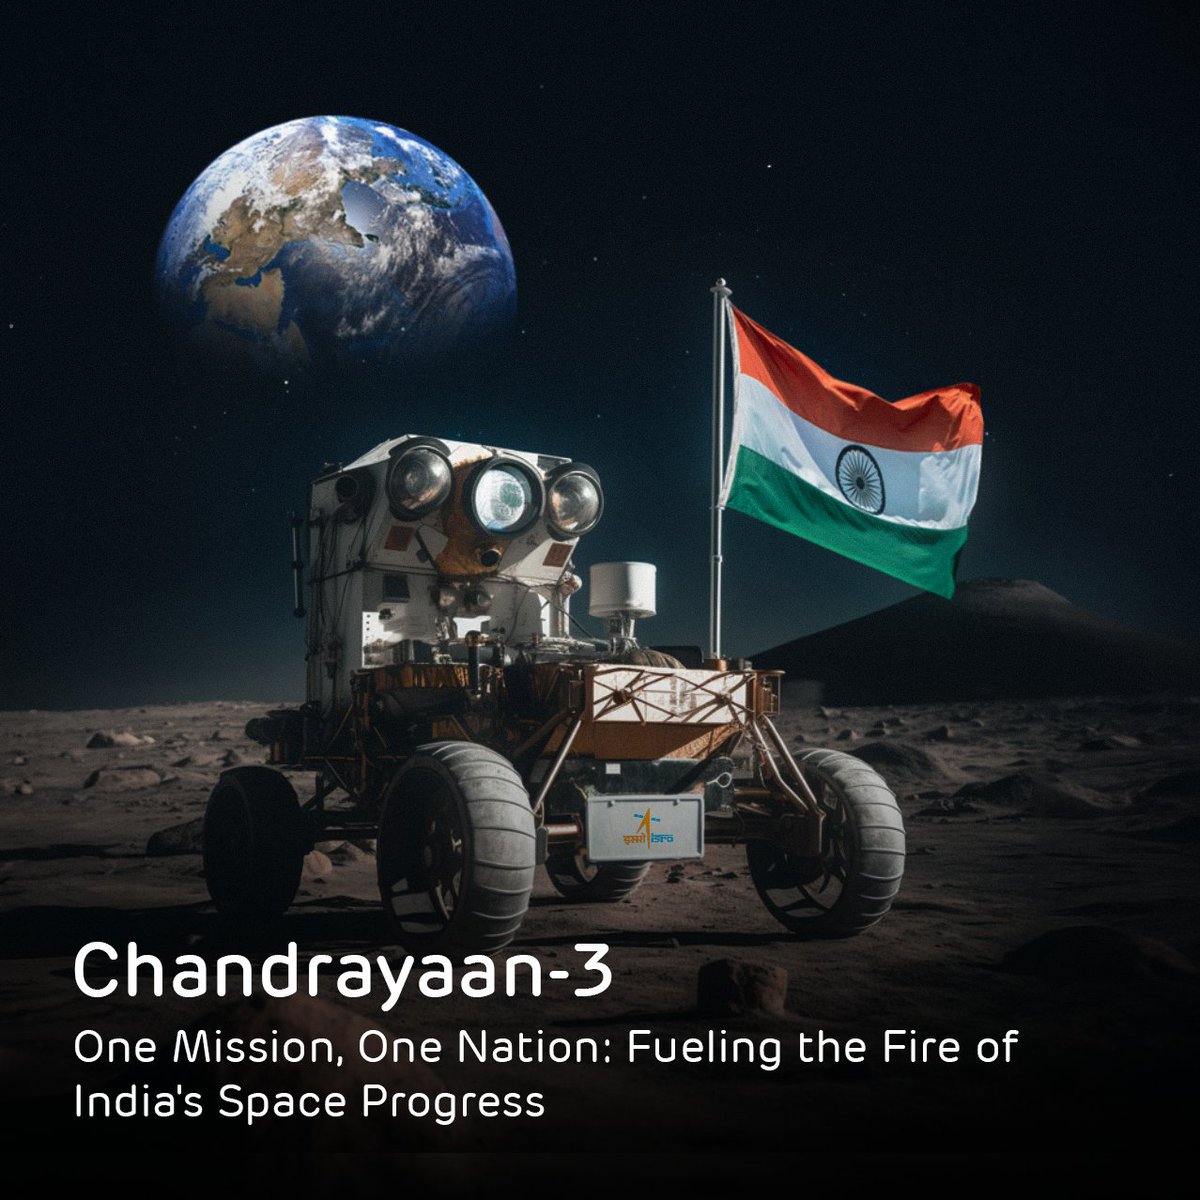 In every challenge, our scientists ignite sparks of innovation. Chandrayaan-3 pens another chapter of India's resilience, a testament to our spirit—undaunted, unstoppable. To @ISRO heroes, your brilliance illuminates our nation's future. 🚀🇮🇳 #Chandrayaan3 #ISRO #Ch3